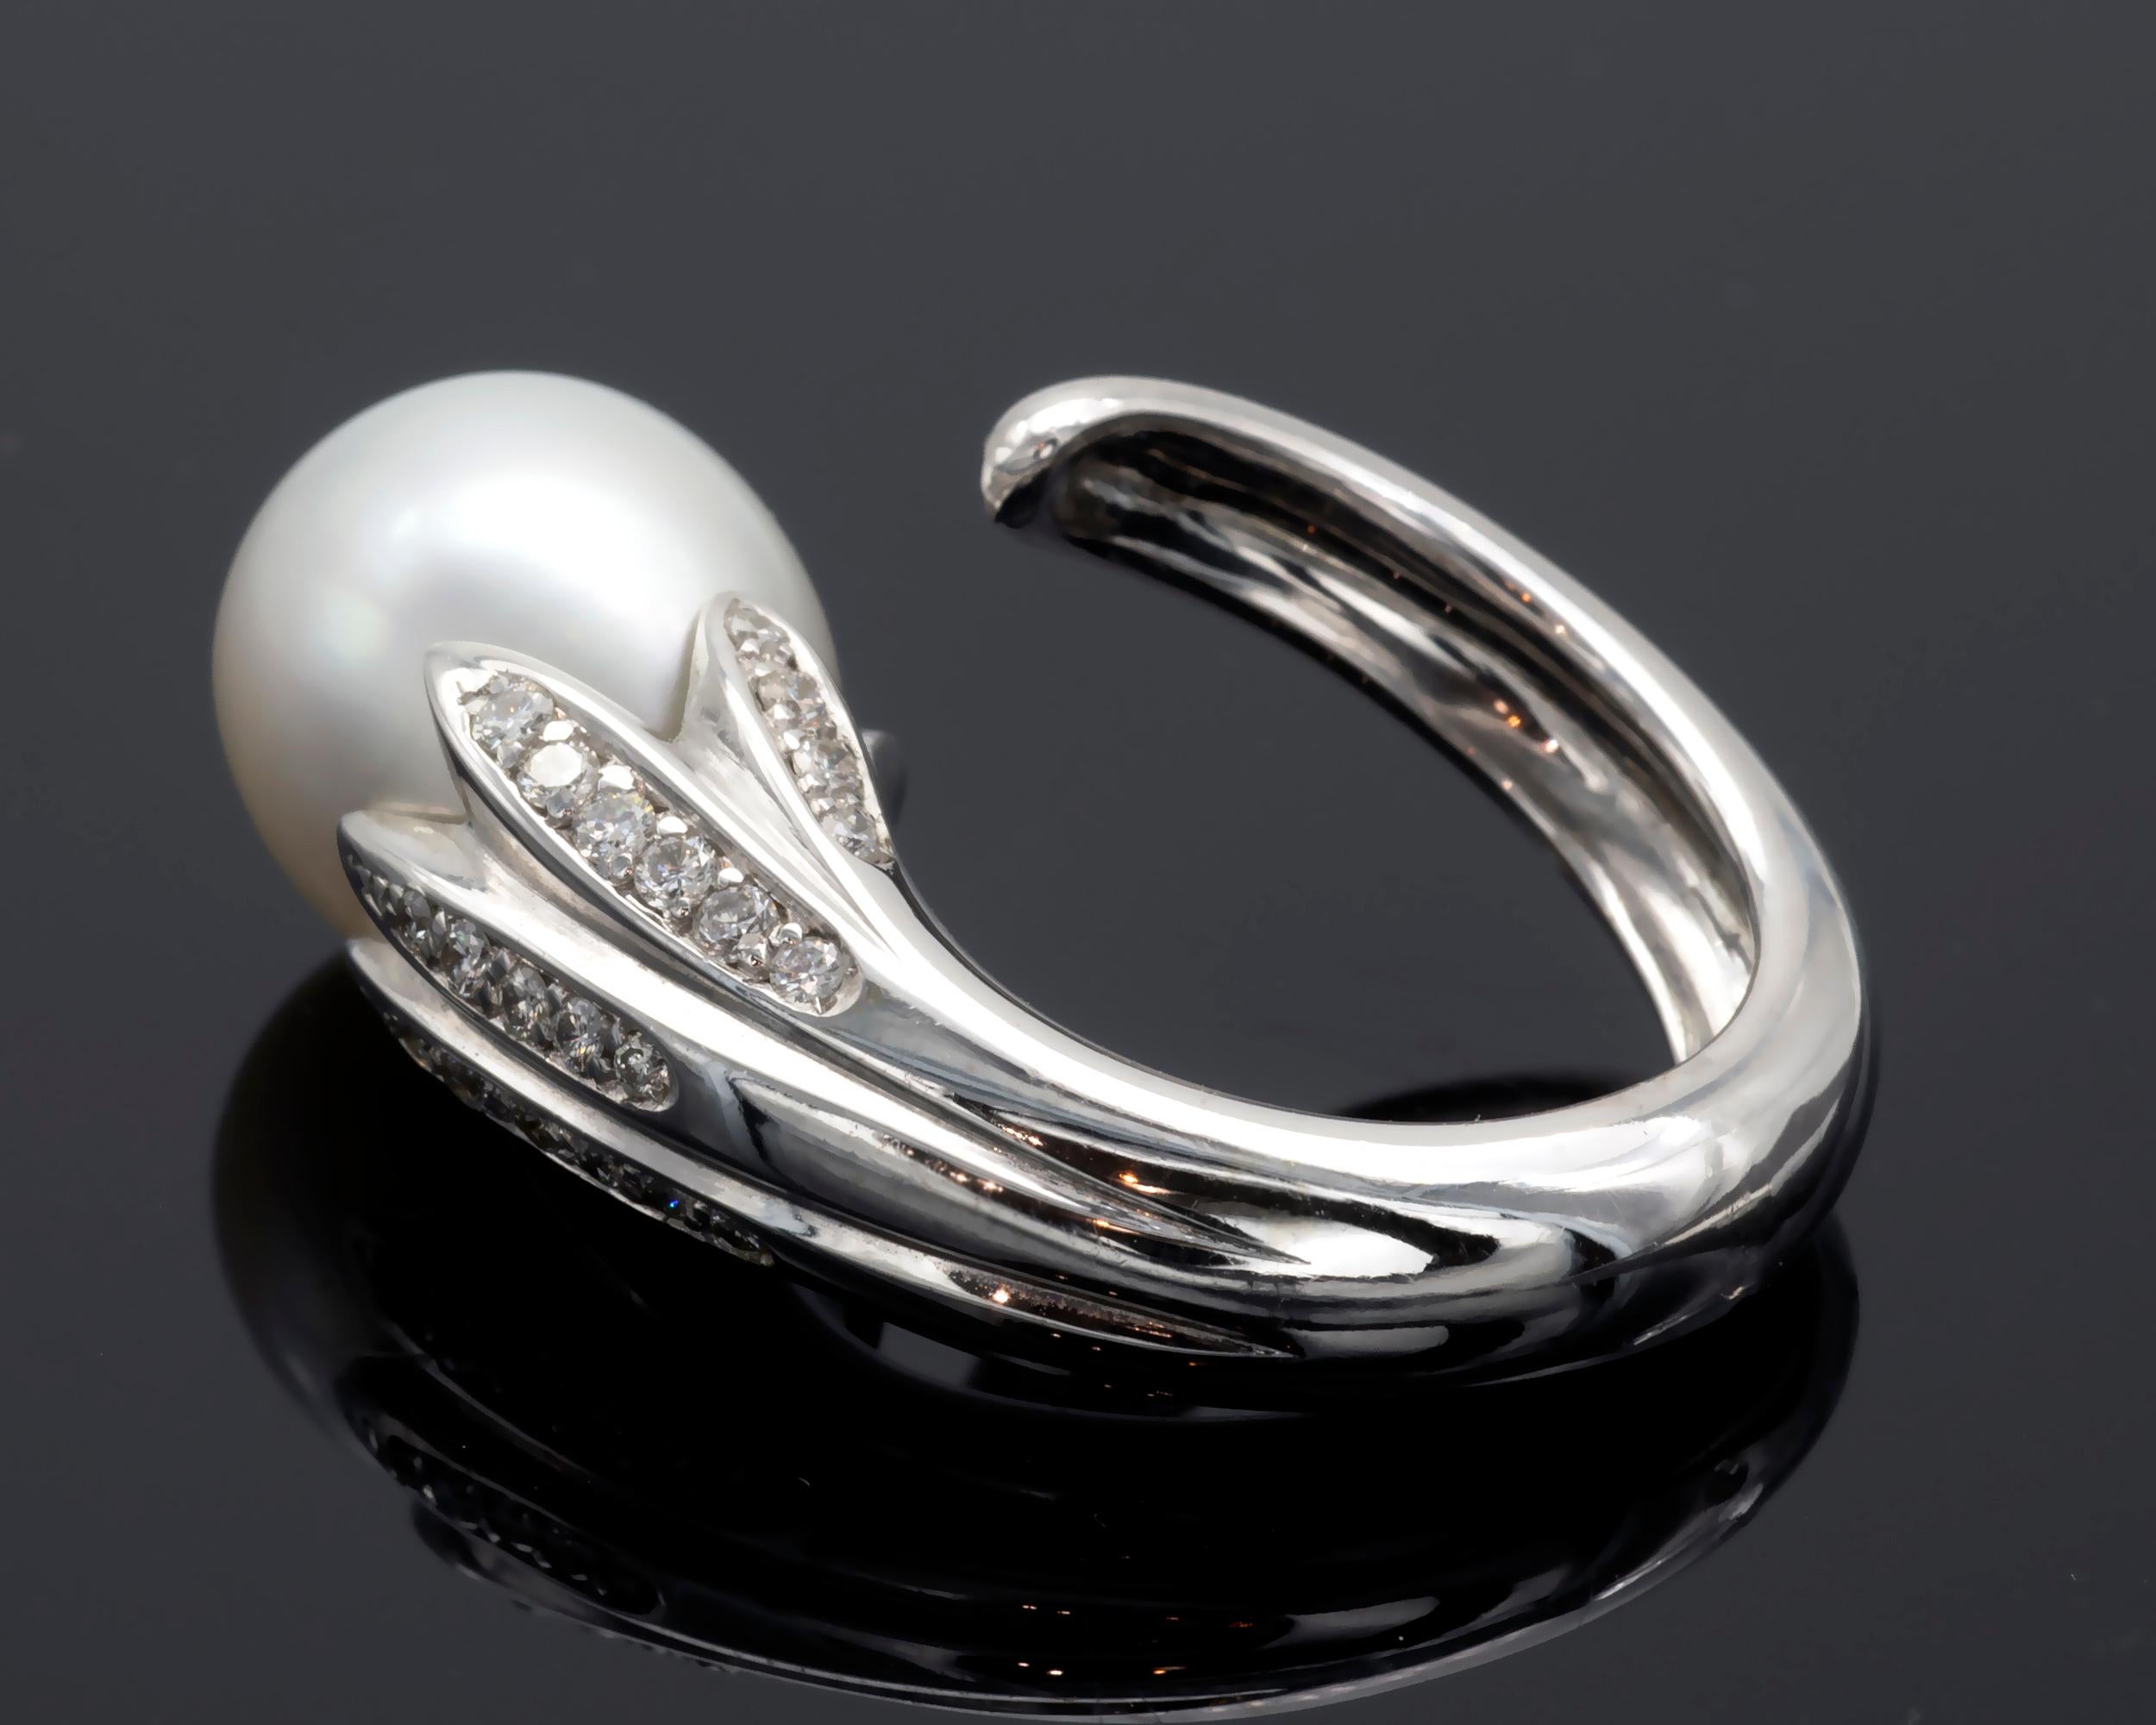 This exceptional ring showcases an 18-karat white gold shank that elegantly wraps around the finger like a stem. From this stem, leaves set with sparkling diamonds cradle a beautiful drop-shaped South Sea pearl measuring 12x16mm. The white pearl's